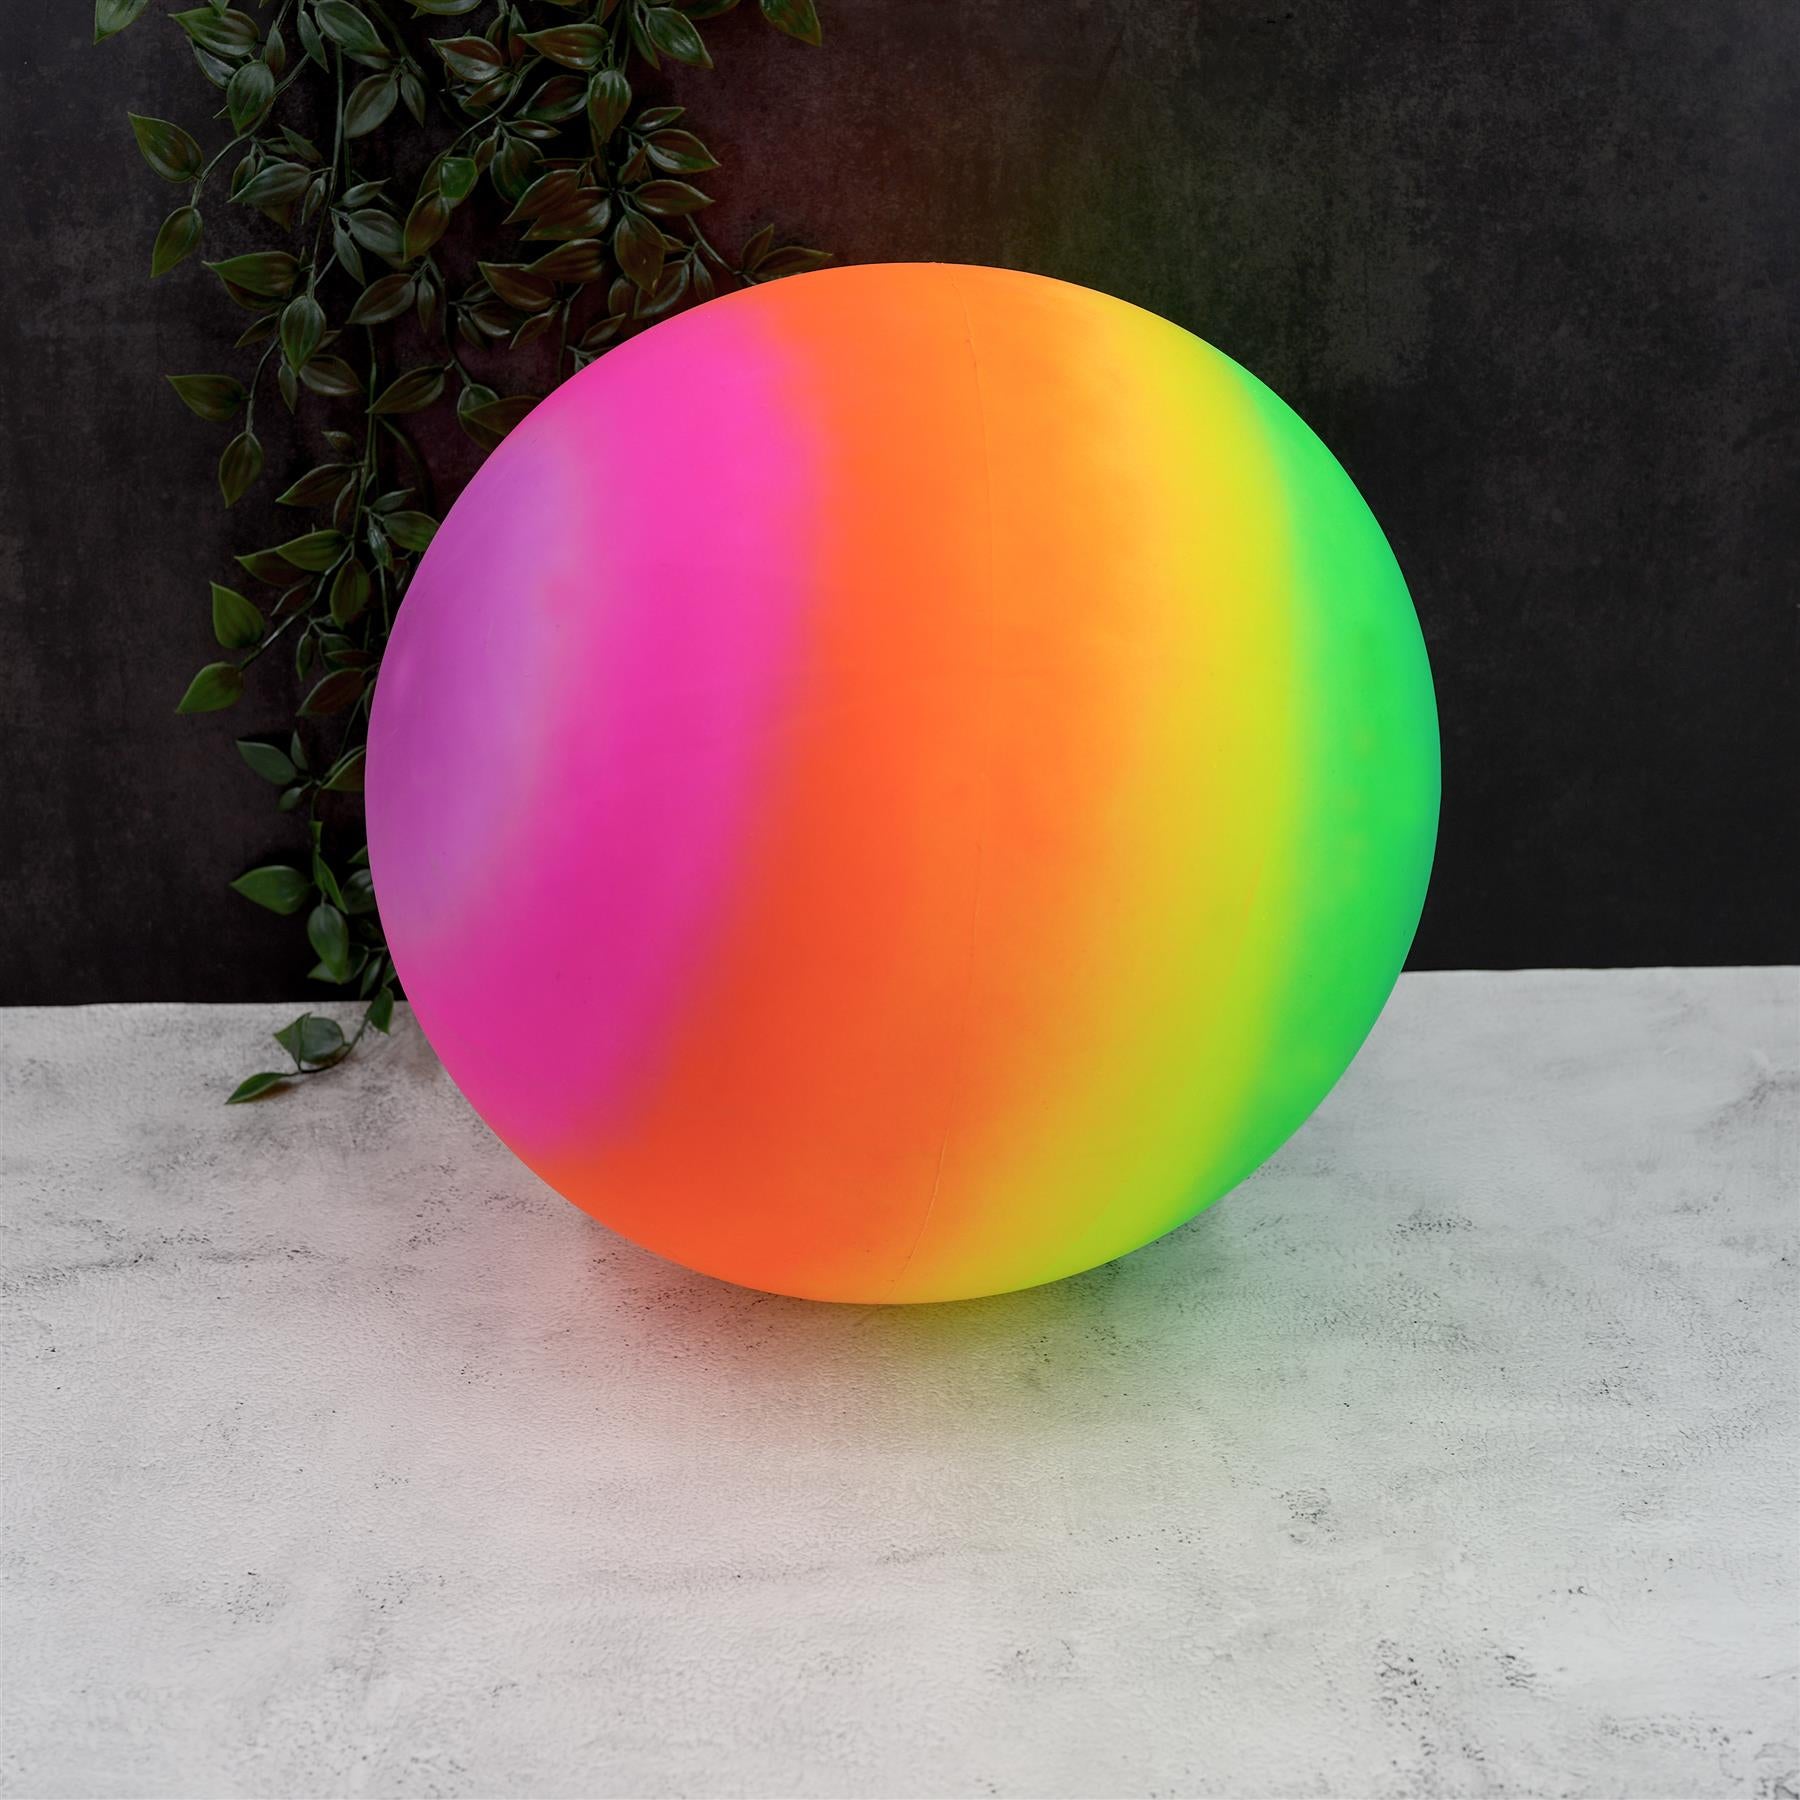 Giant Neon Rainbow Ball by The Magic Toy Shop - UKBuyZone